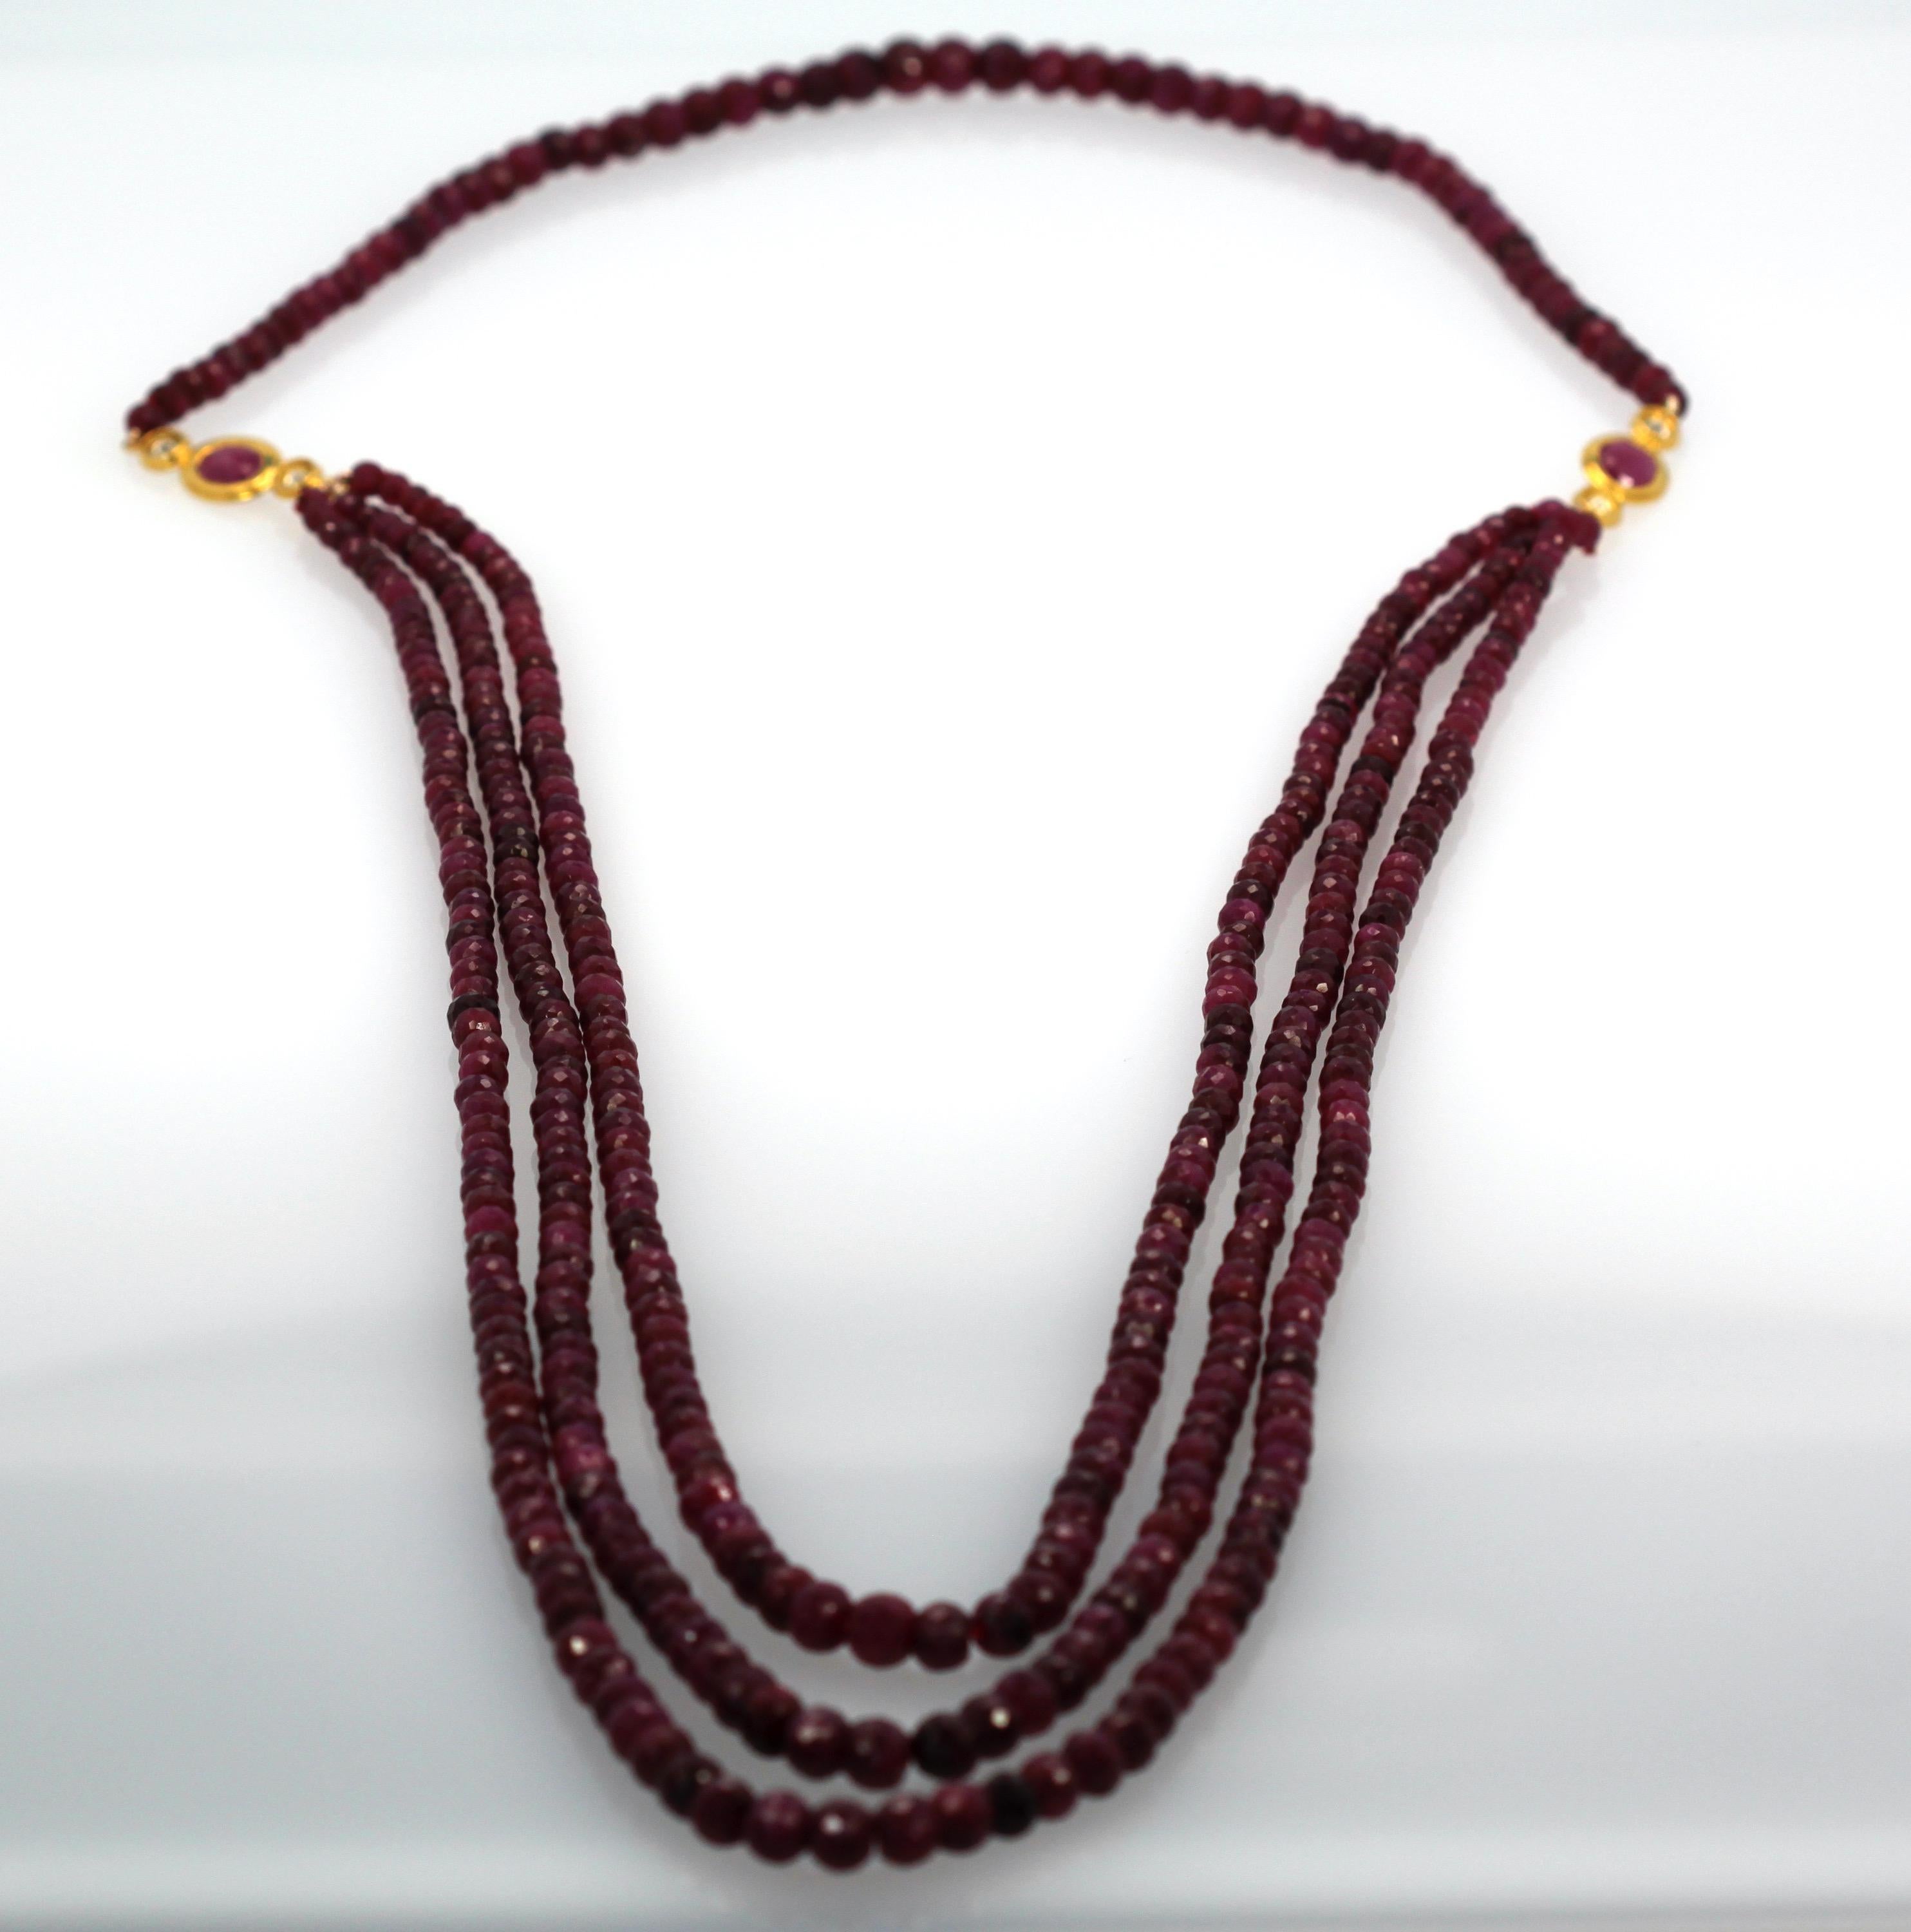 This piece will make a statement and have all eyes on you!  It features faceted Ruby beads that are a rich, deep, true ruby red with three strands in front and one strand in back. The two faceted oval rubies are approximately 1.50 carats each, and